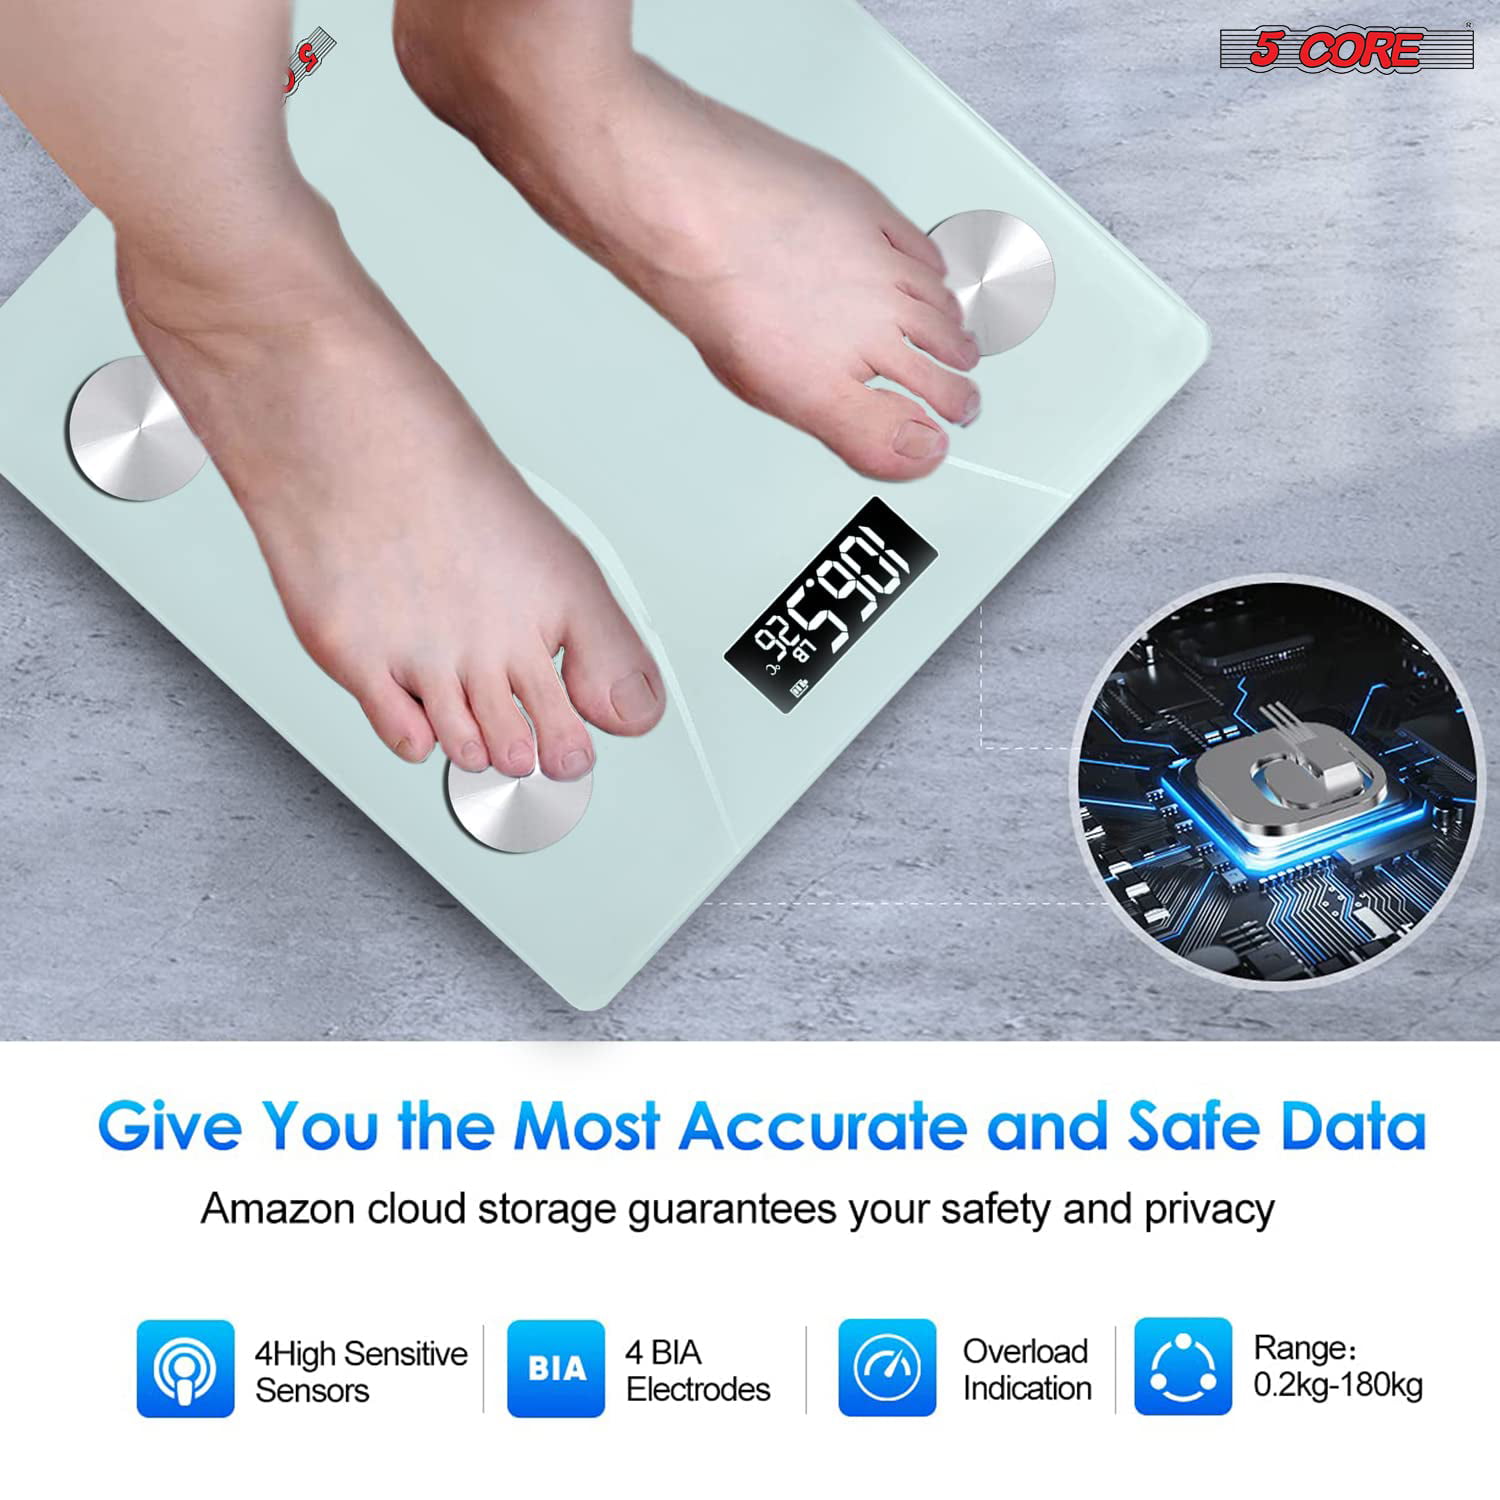 5 Core Digital Scale for Body Weight, Precision Bathroom Weighing Bath Scale,  Step-On Technology, High Capacity - 400 lbs. Large Display, Batteries  Included BS 01 B WH 